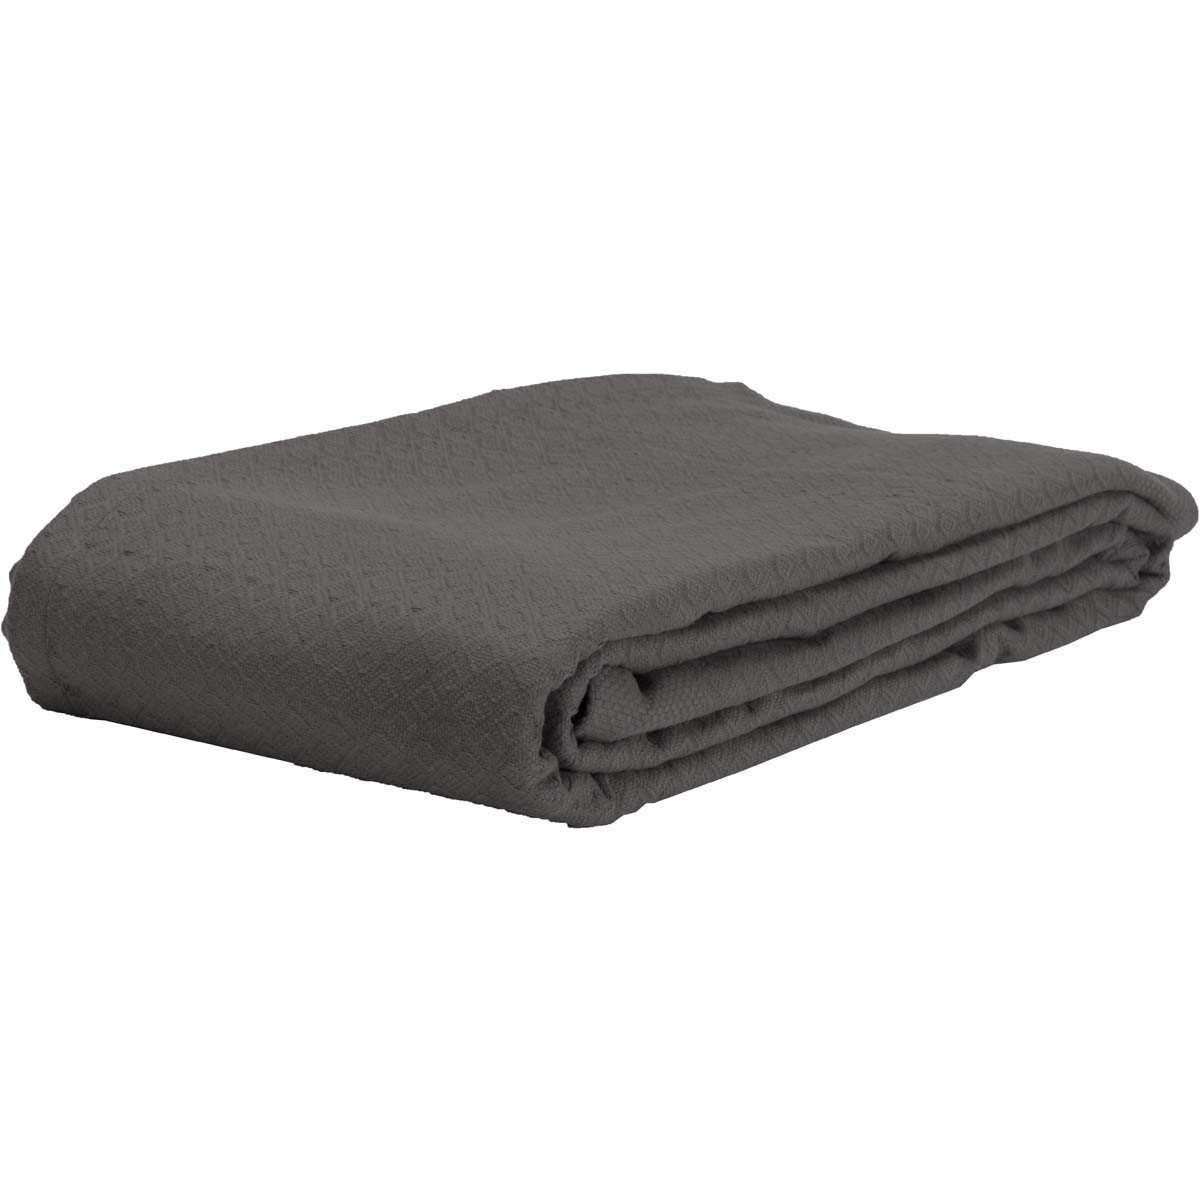 Serenity Grey Cotton Woven Blanket VHC Brands folded